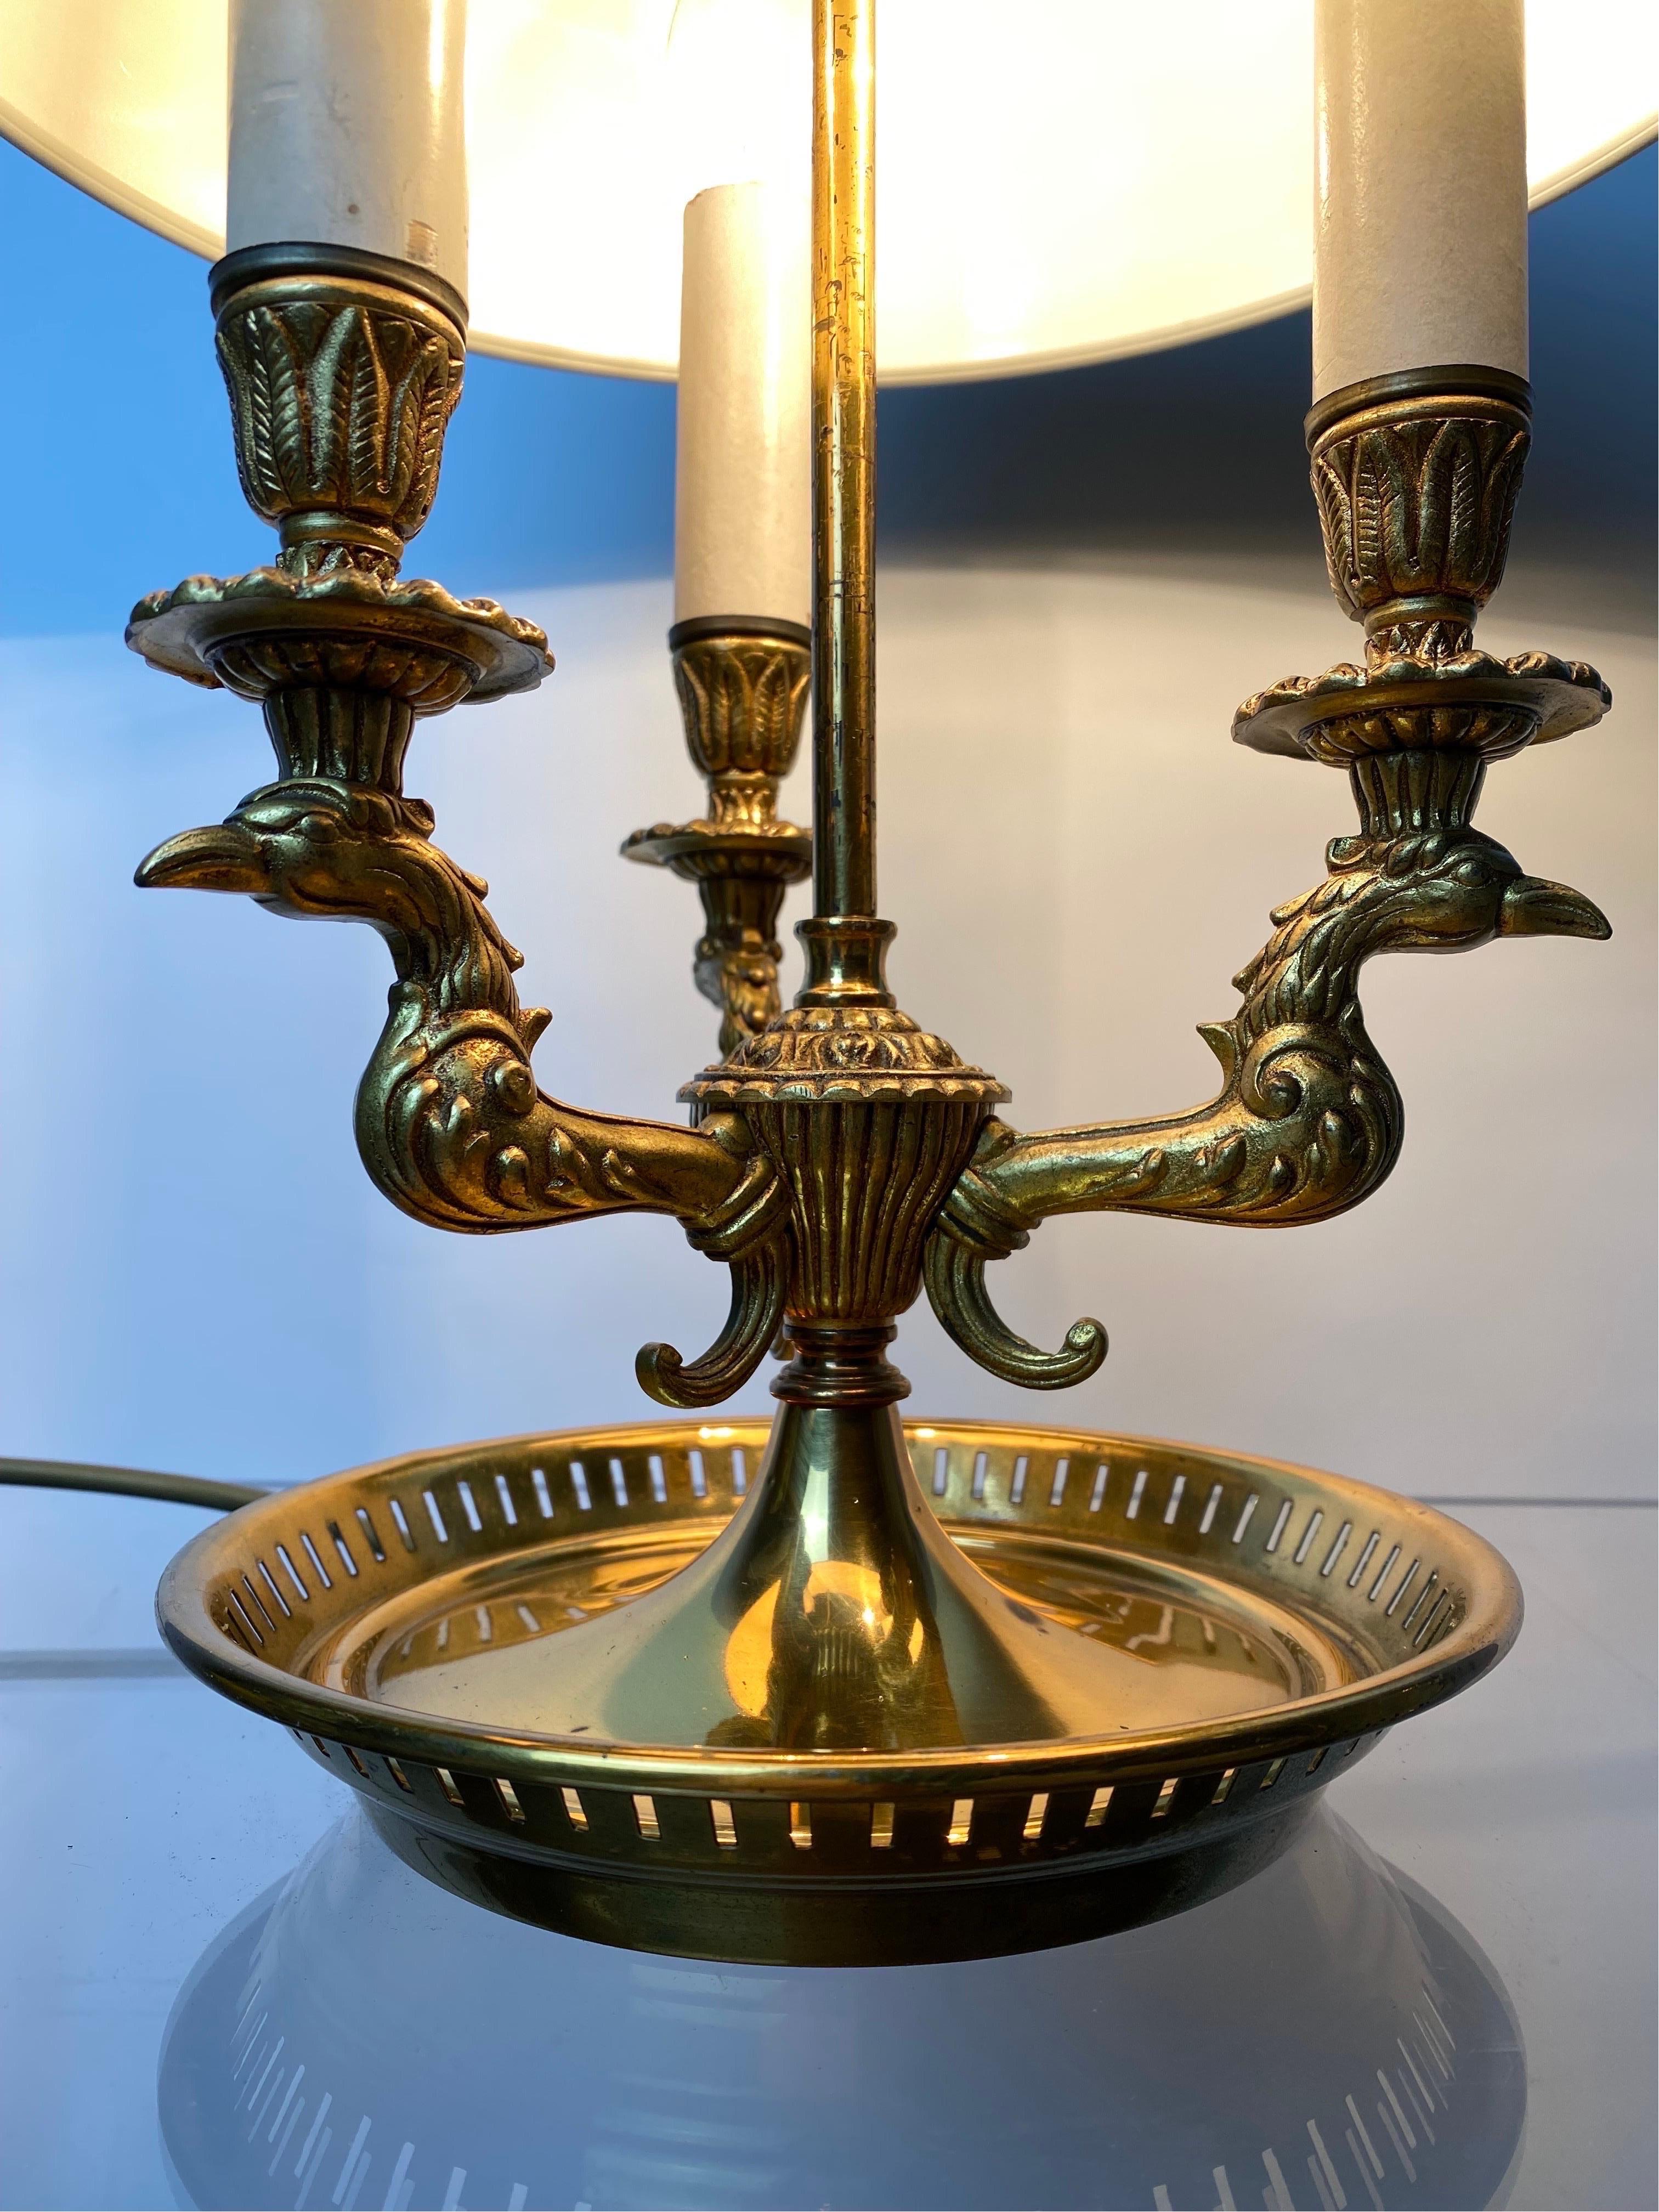 French Empire Gilded Bronze Bouillotte Lamp with 3 Eagle Arms In Good Condition For Sale In Halle, DE